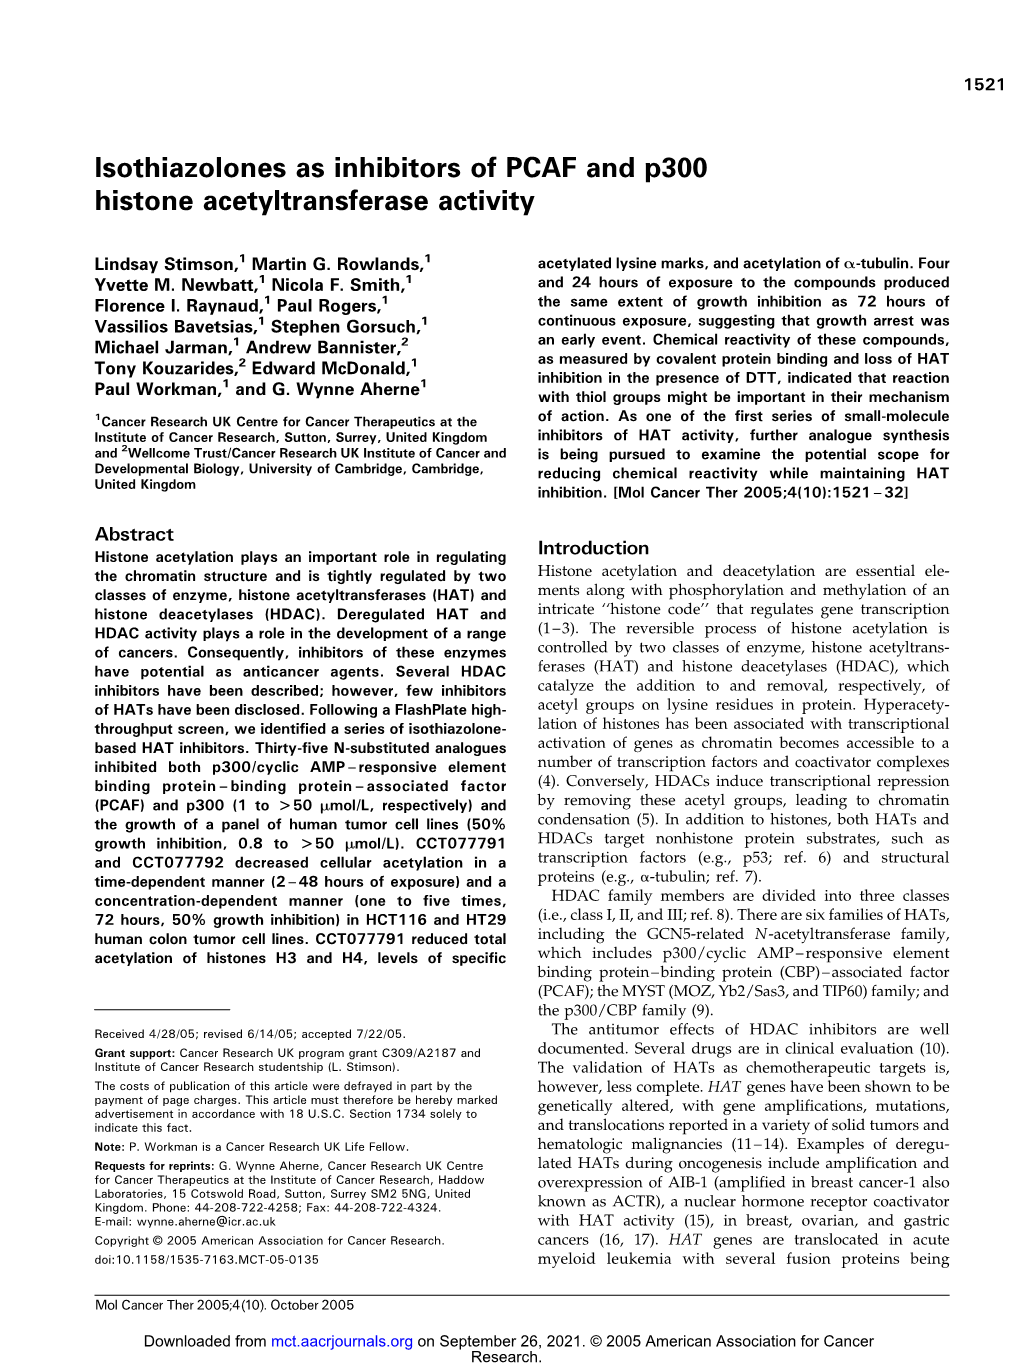 Isothiazolones As Inhibitors of PCAF and P300 Histone Acetyltransferase Activity